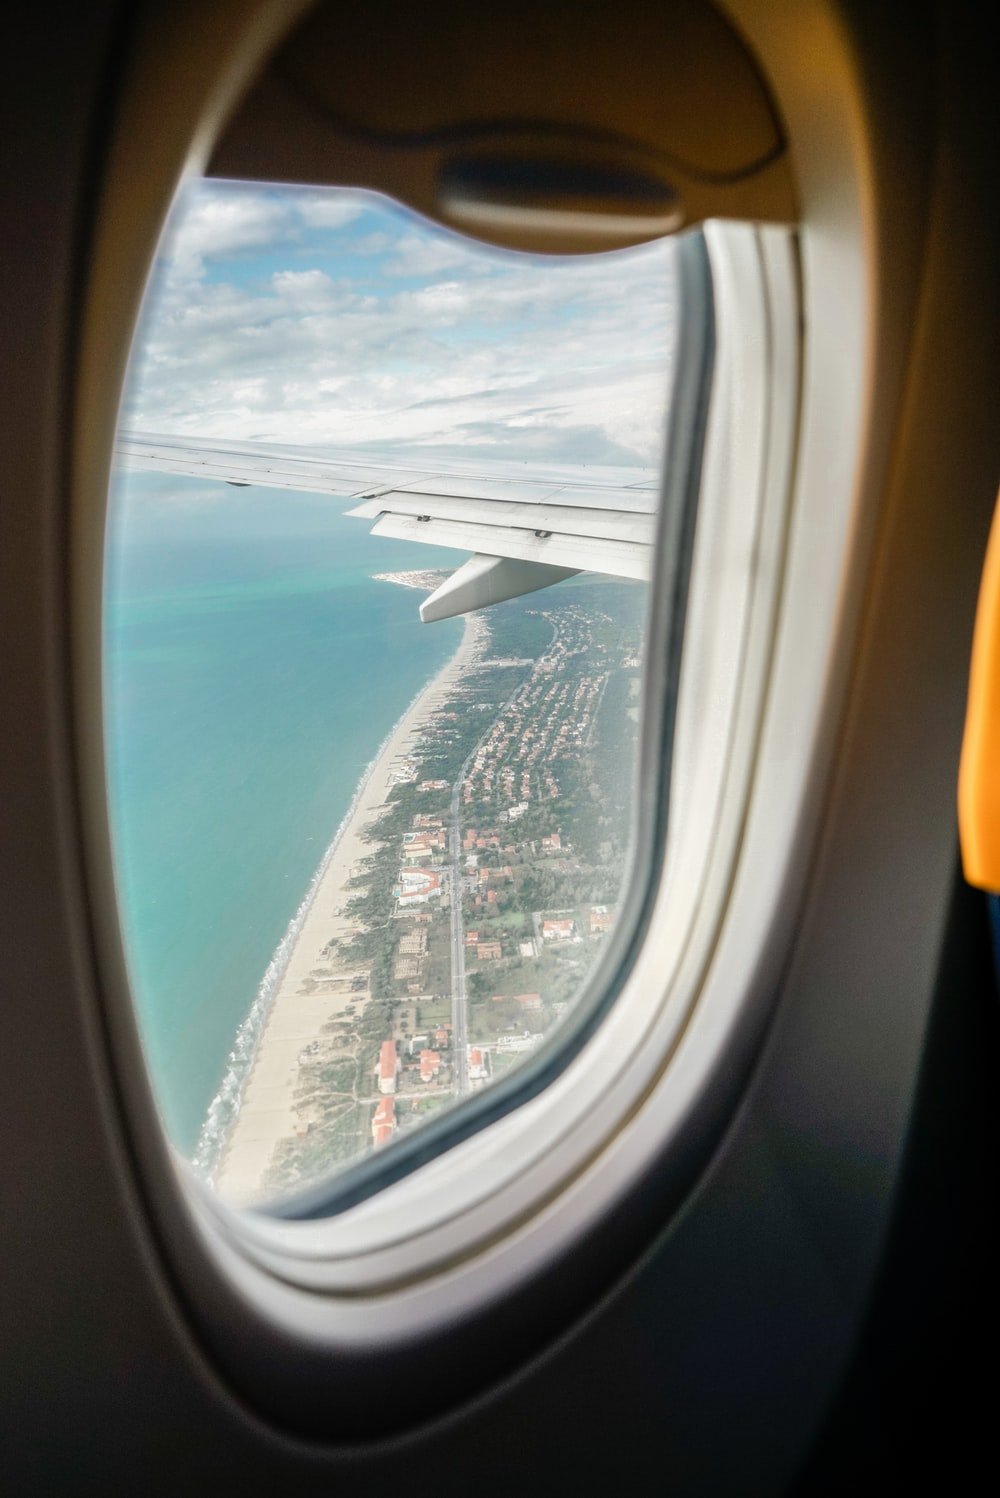 Airplane Window View Picture. Download Free Image